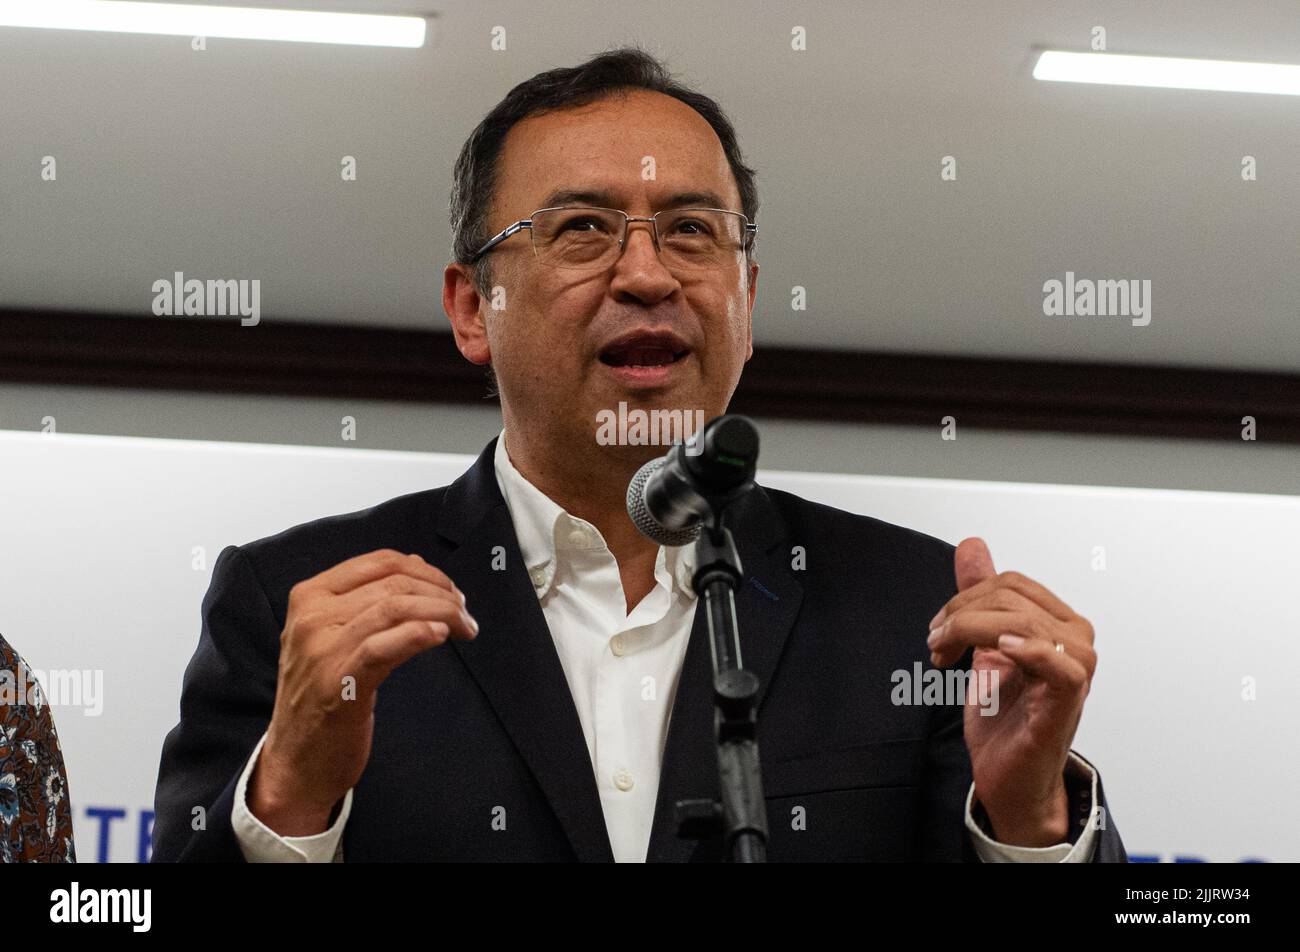 Alfonso Prada, former debate chief of President-elect Gustavo Petro gives a  press conference on advancements with mayors of Colombian cities, in  Bogota, Colombia on July 27, 2022. Photo by: S. Barros/Long Visual